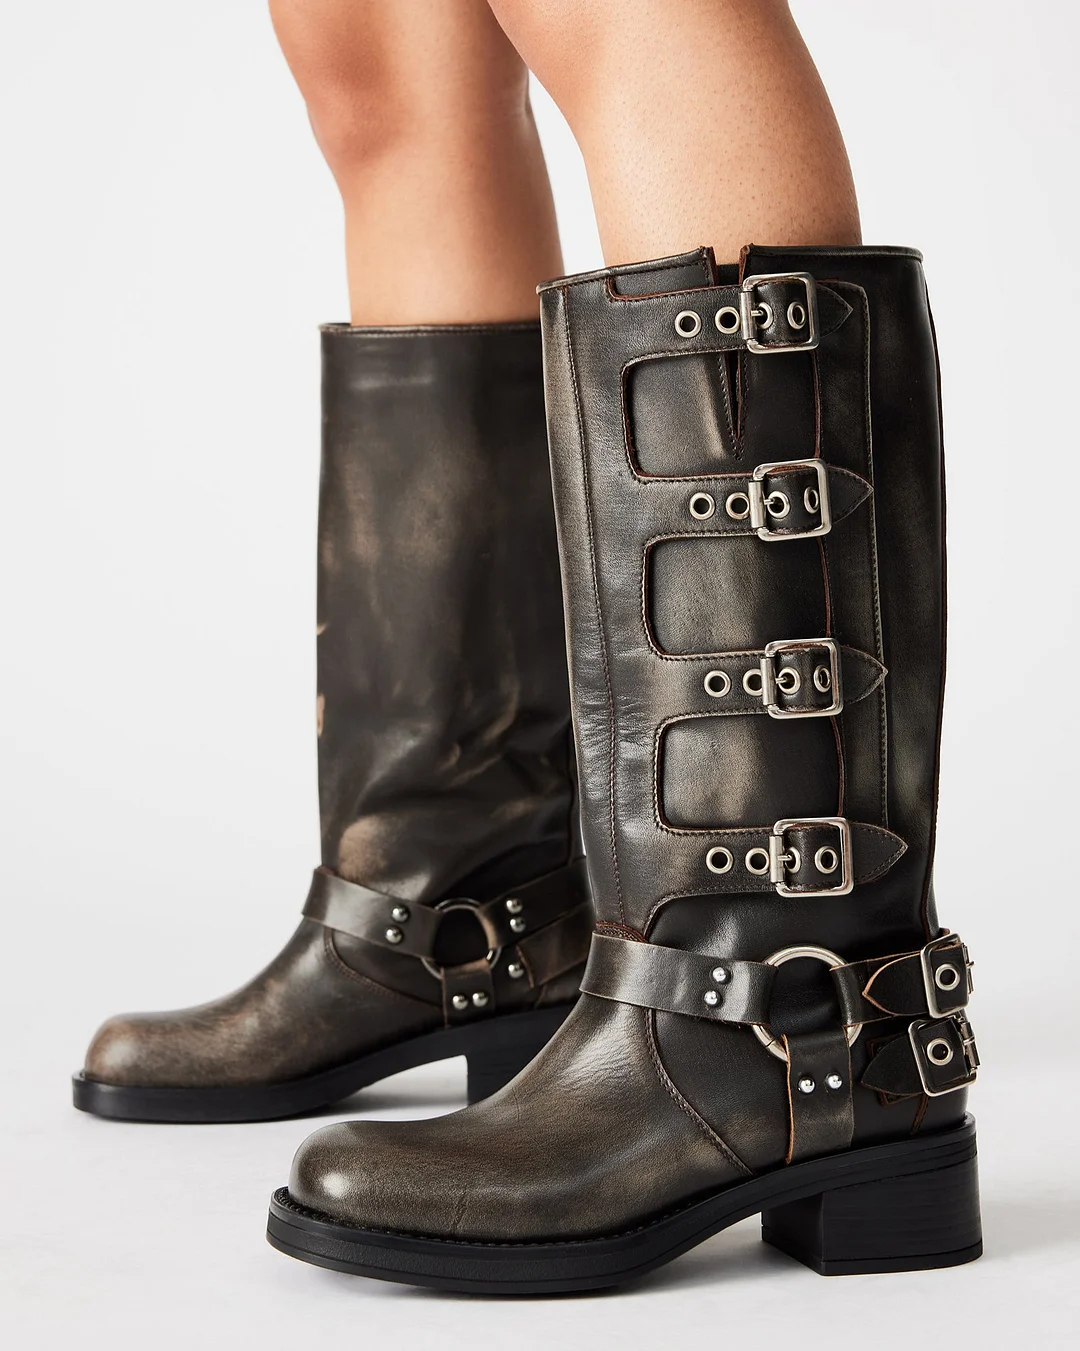 Black Distressed Round Toe Buckle Strap Women's Motorcycle Boots Nicepairs